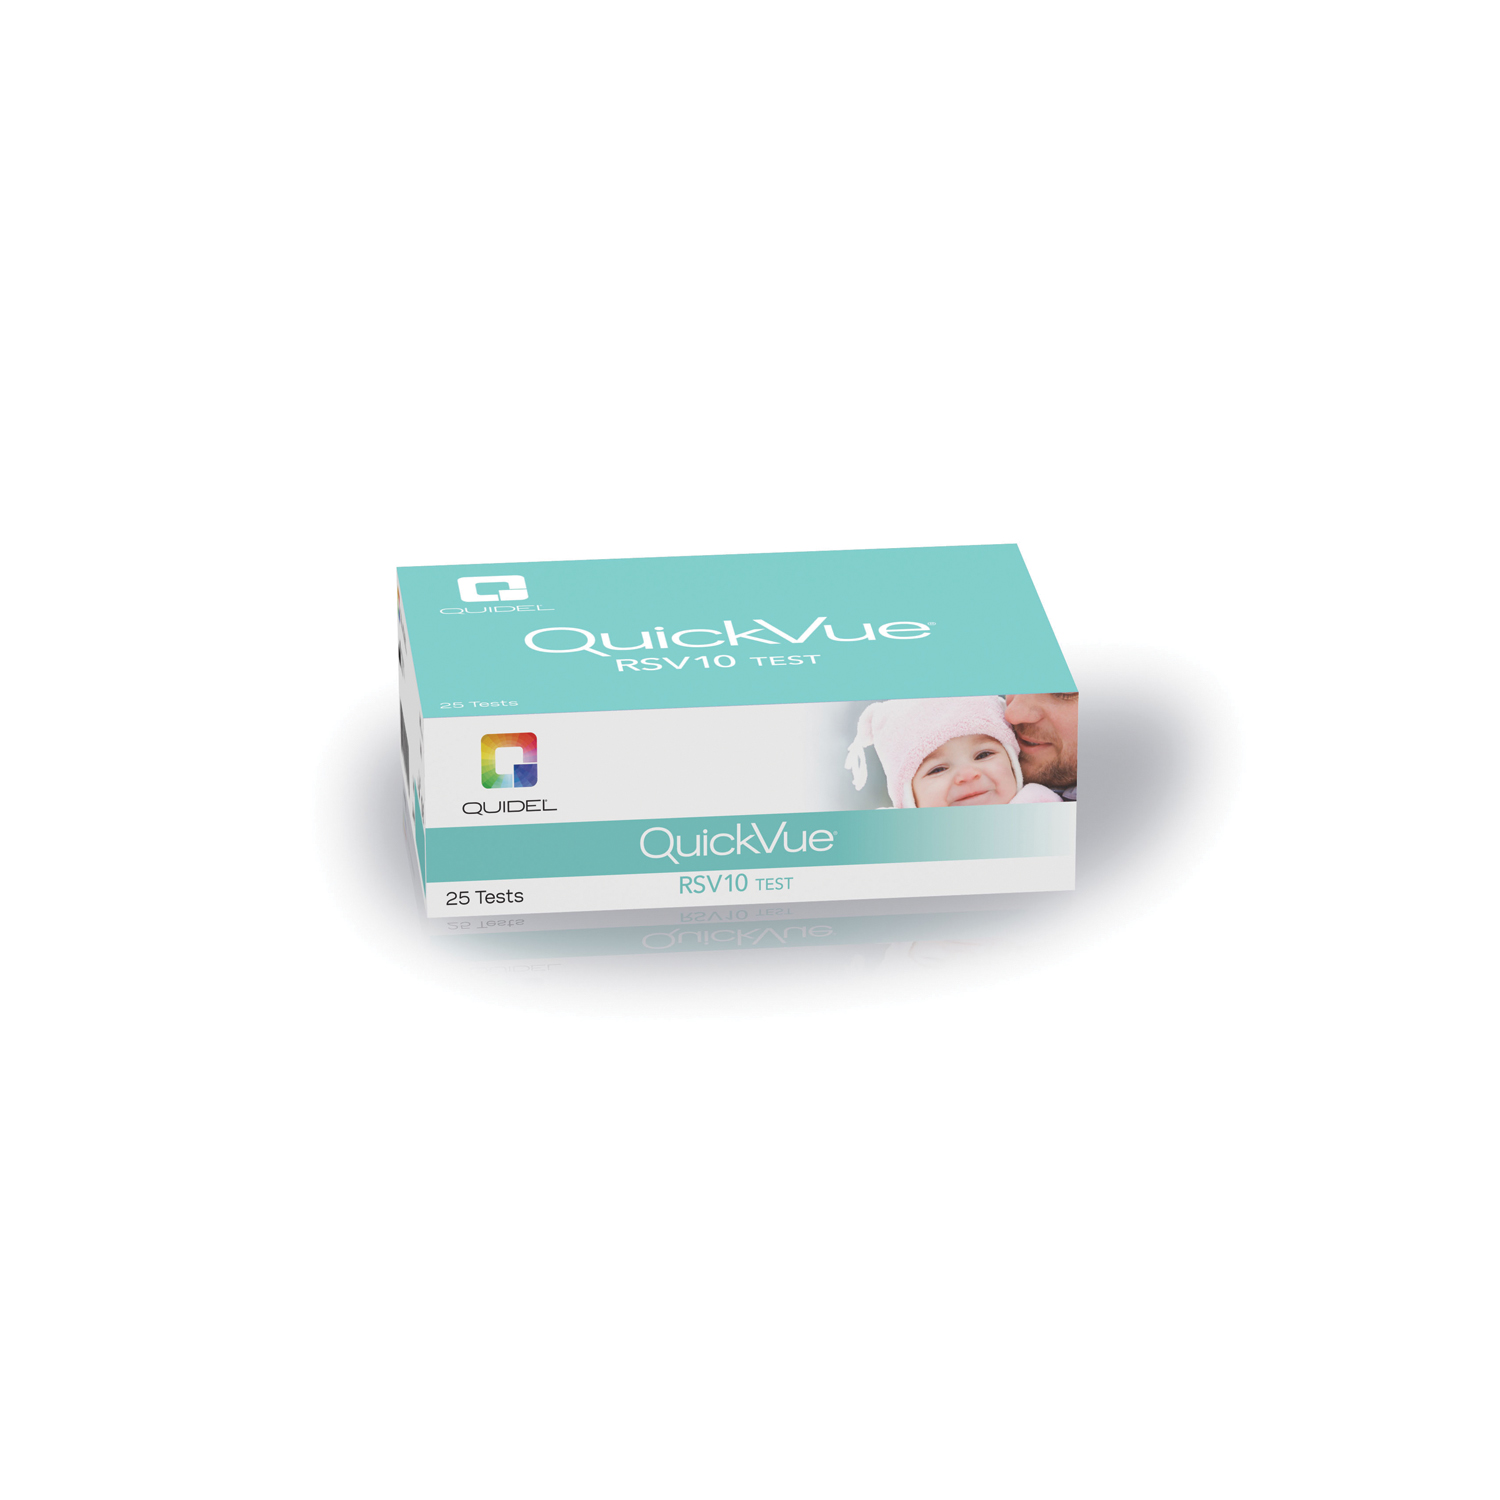 QUIDEL QUICKVUE RESPIRATORY SYNCYTIAL VIRUS (RSV) : 20193 KT                      $279.77 Stocked